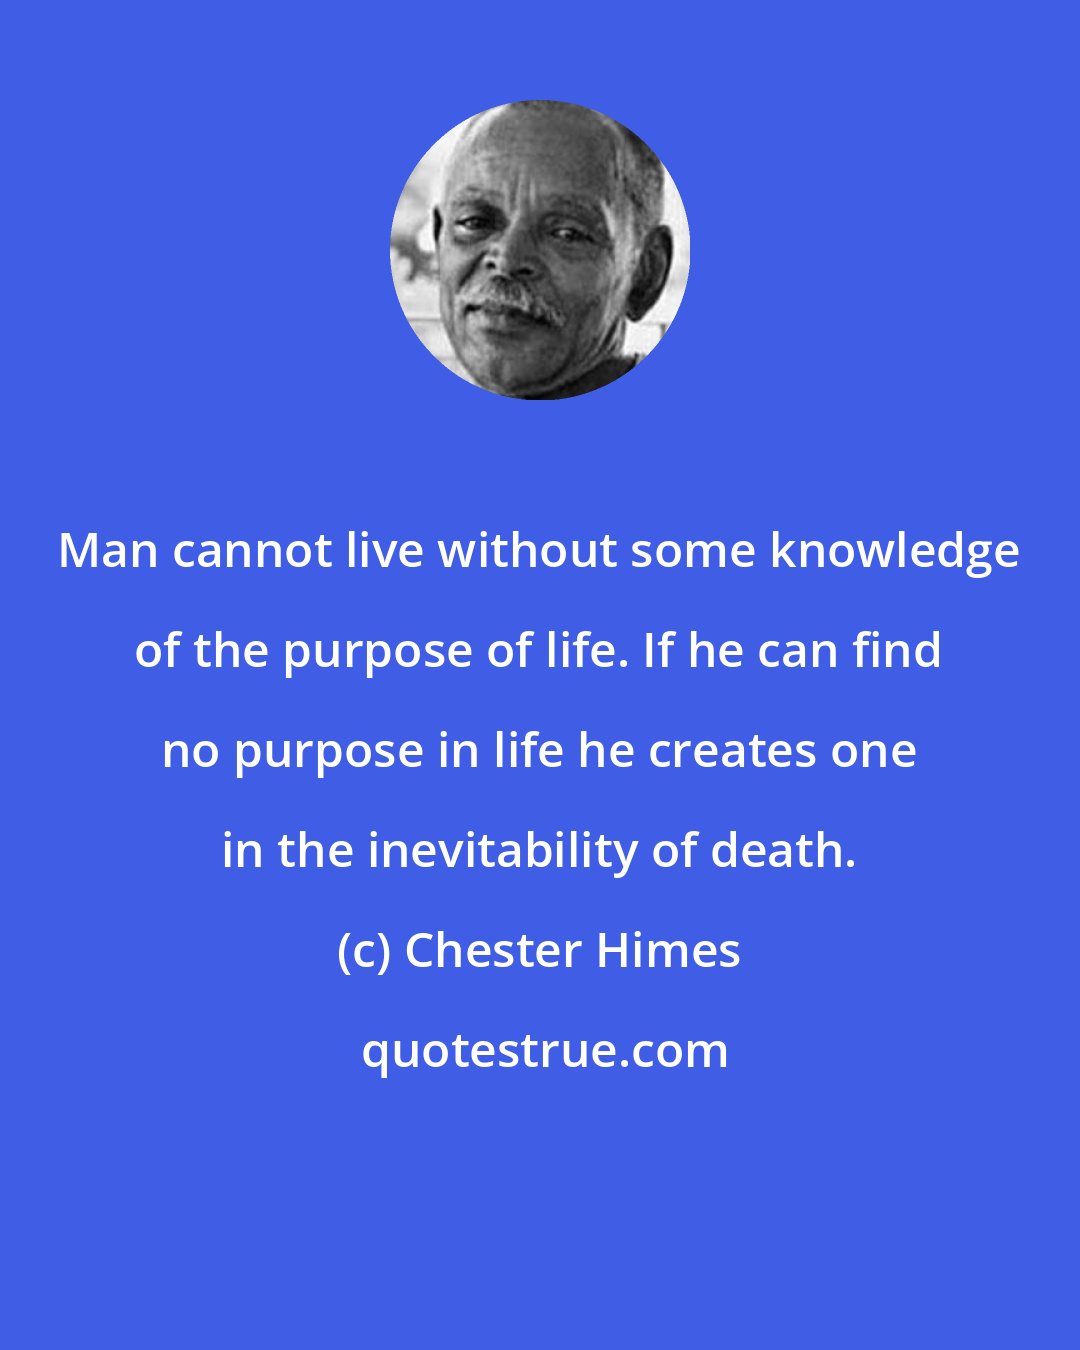 Chester Himes: Man cannot live without some knowledge of the purpose of life. If he can find no purpose in life he creates one in the inevitability of death.